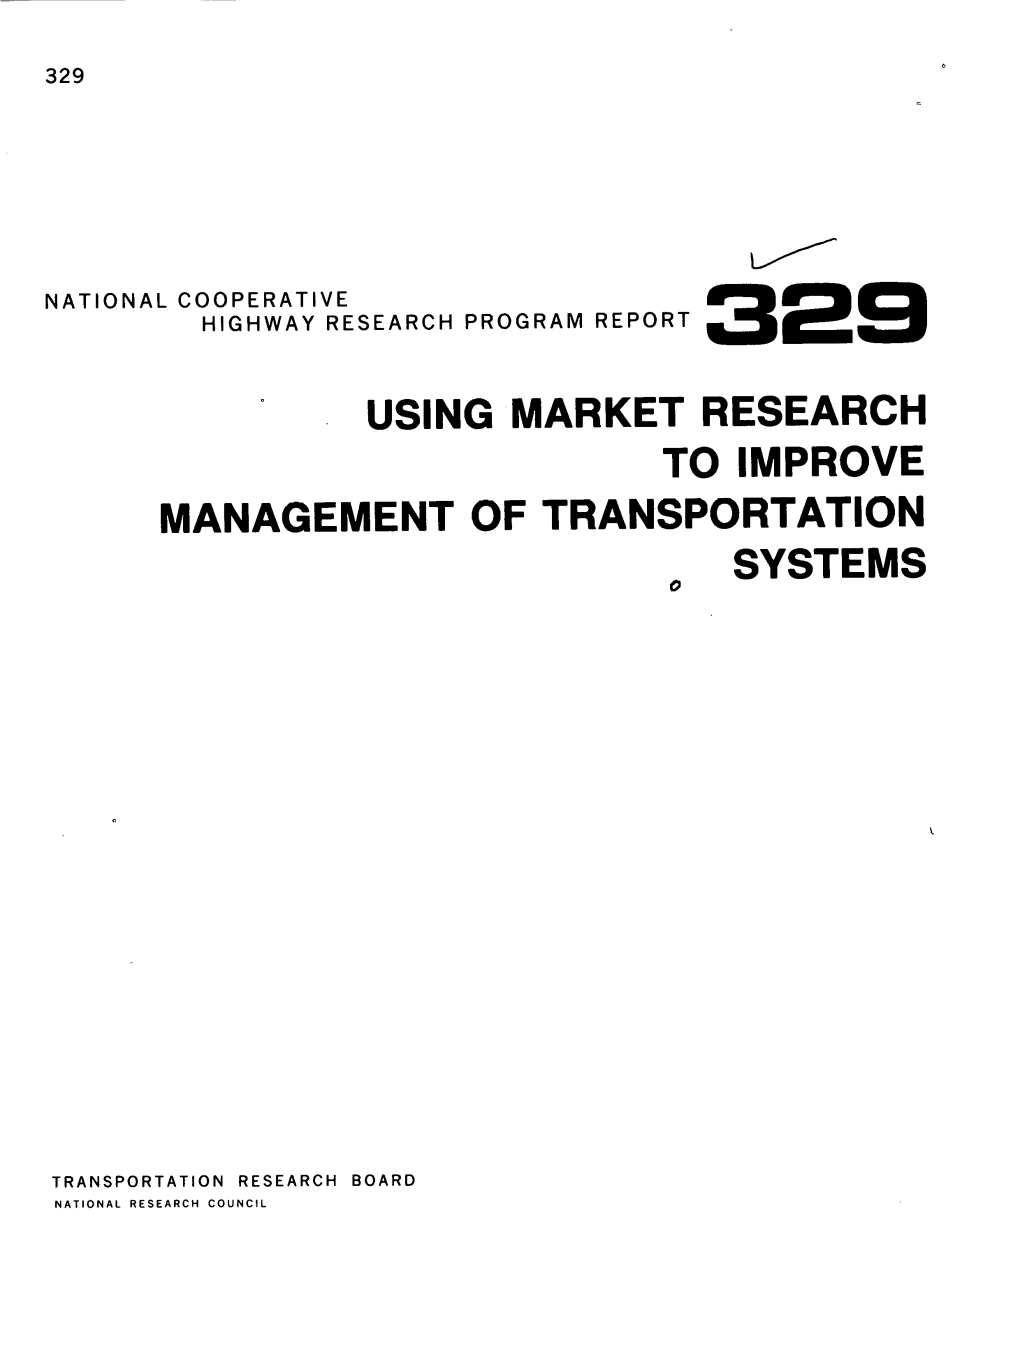 Using Market Research to Improve Management of Transportation Systems